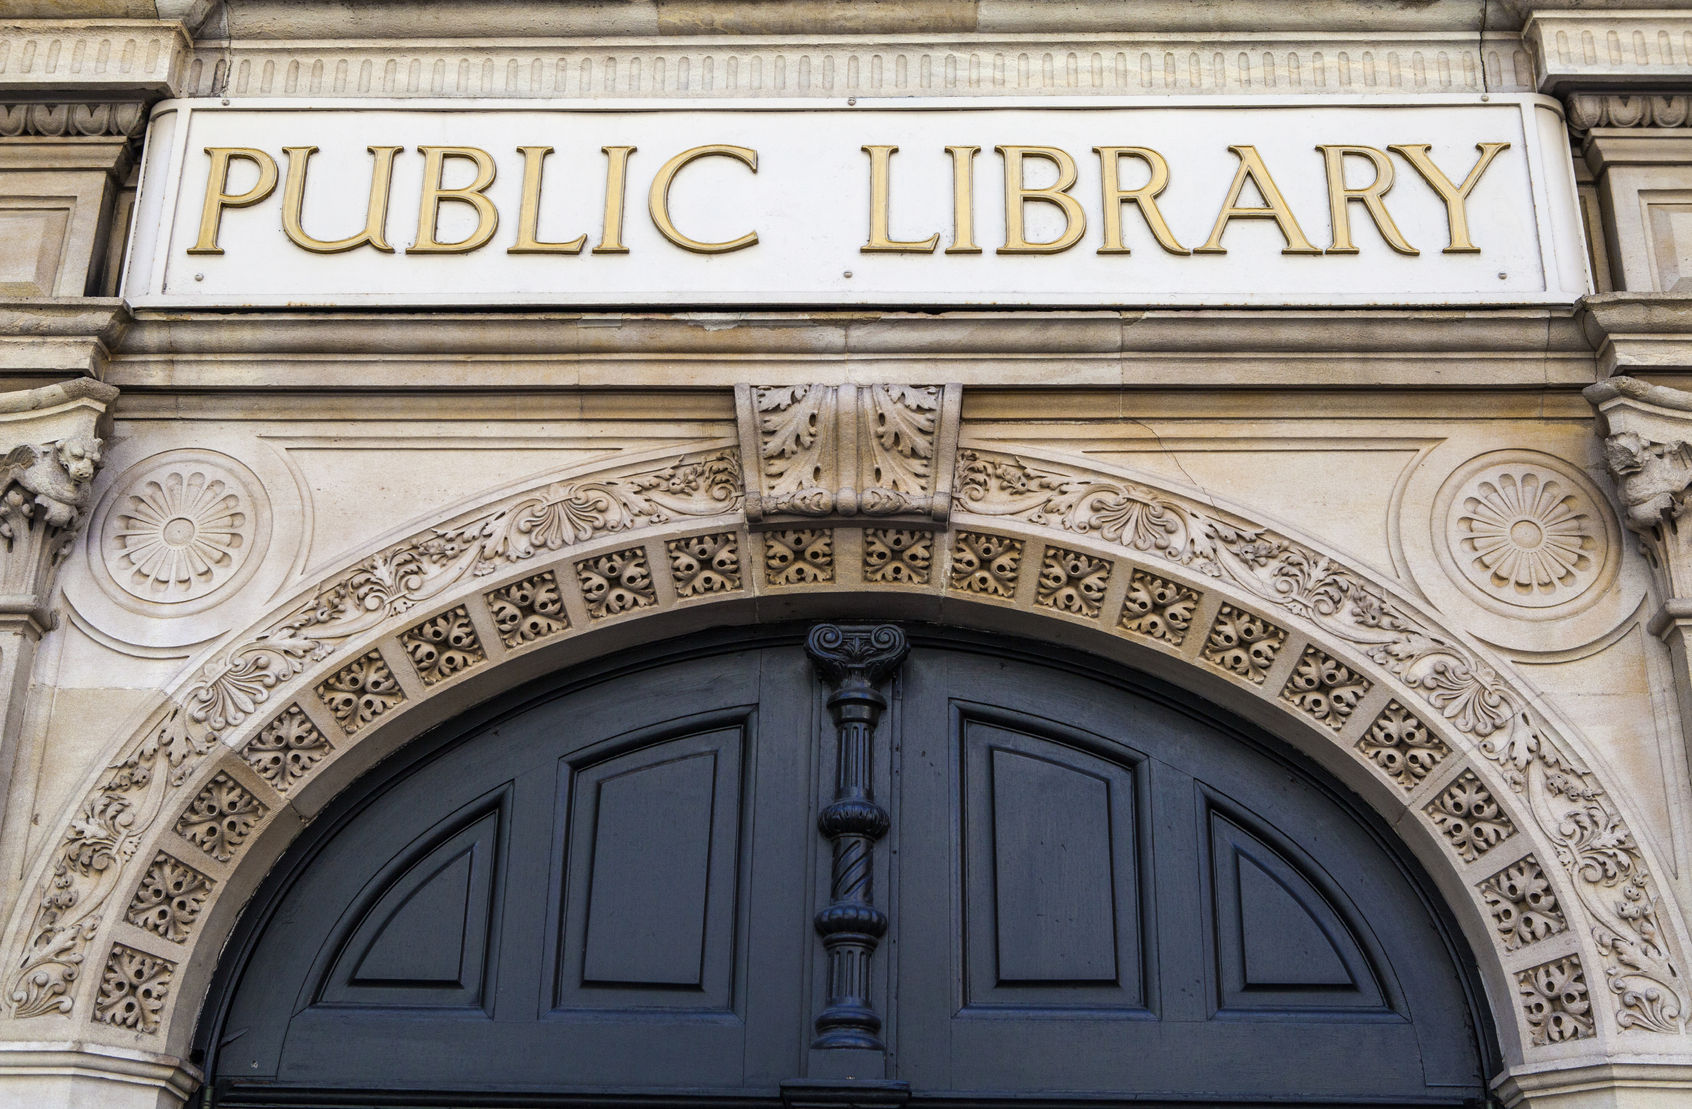 Public Library sign